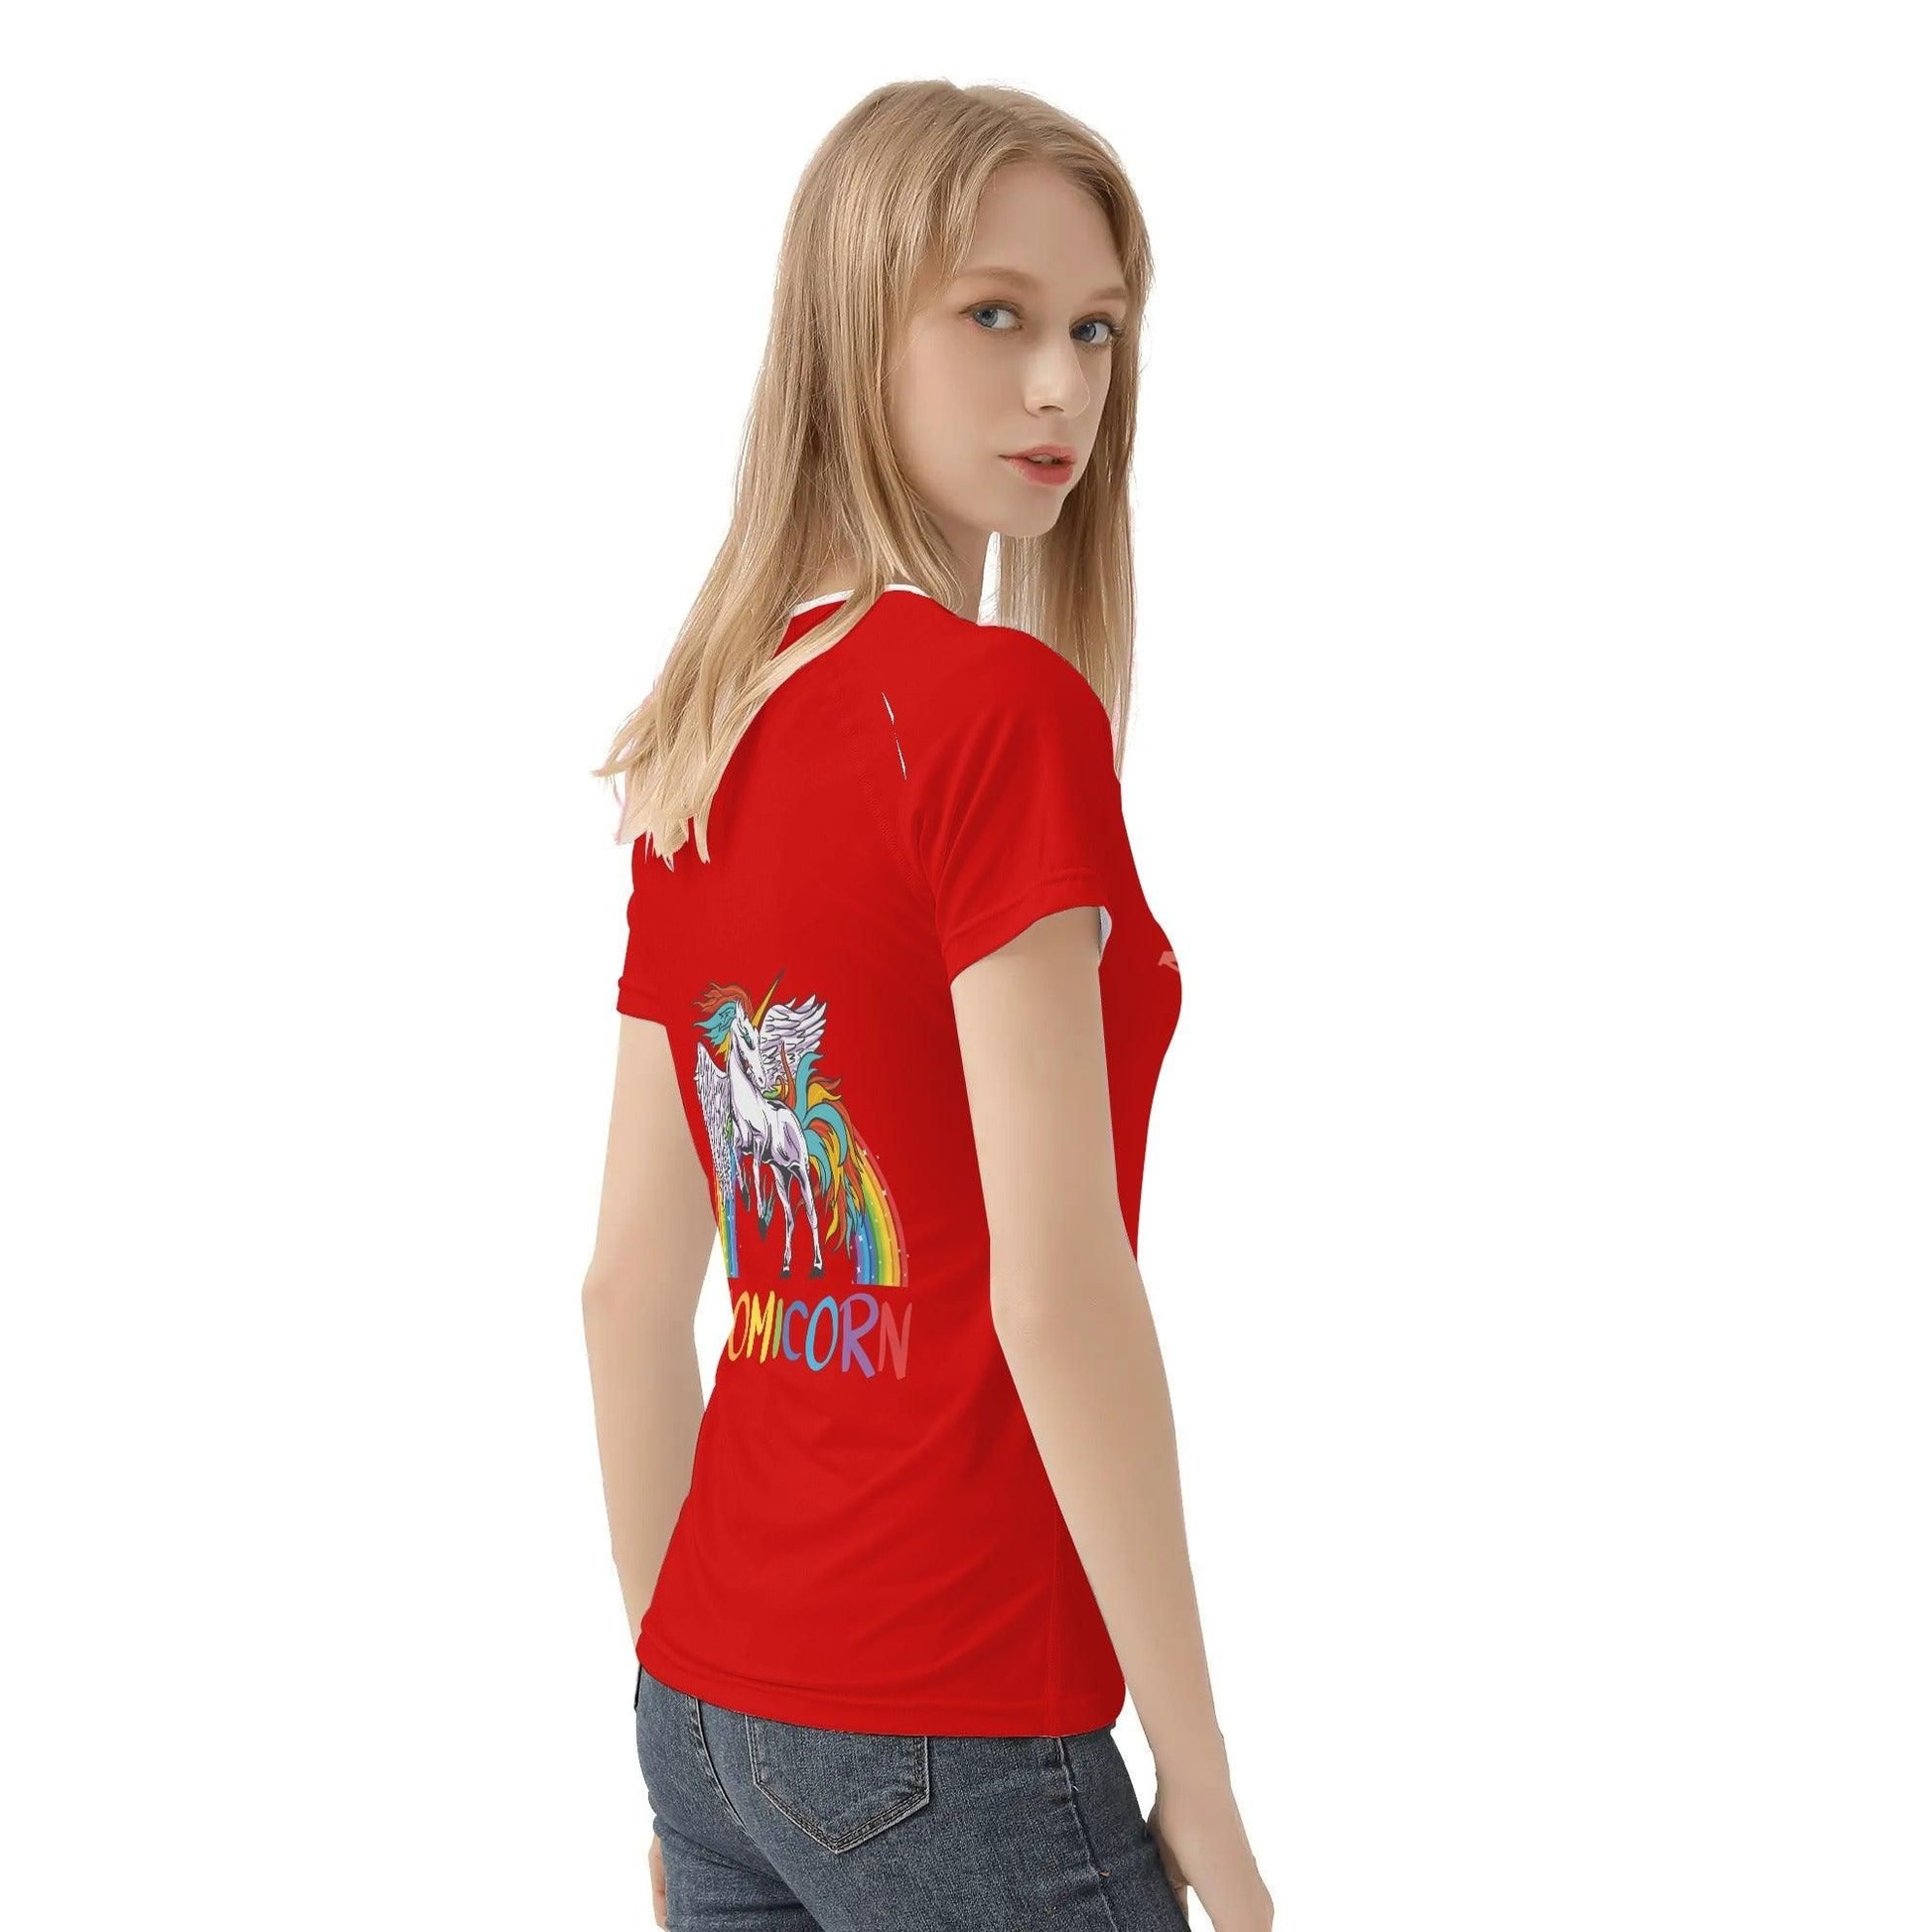 Momicorn Womens T shirt Red - NX Vogue New York | Luxury Redefined